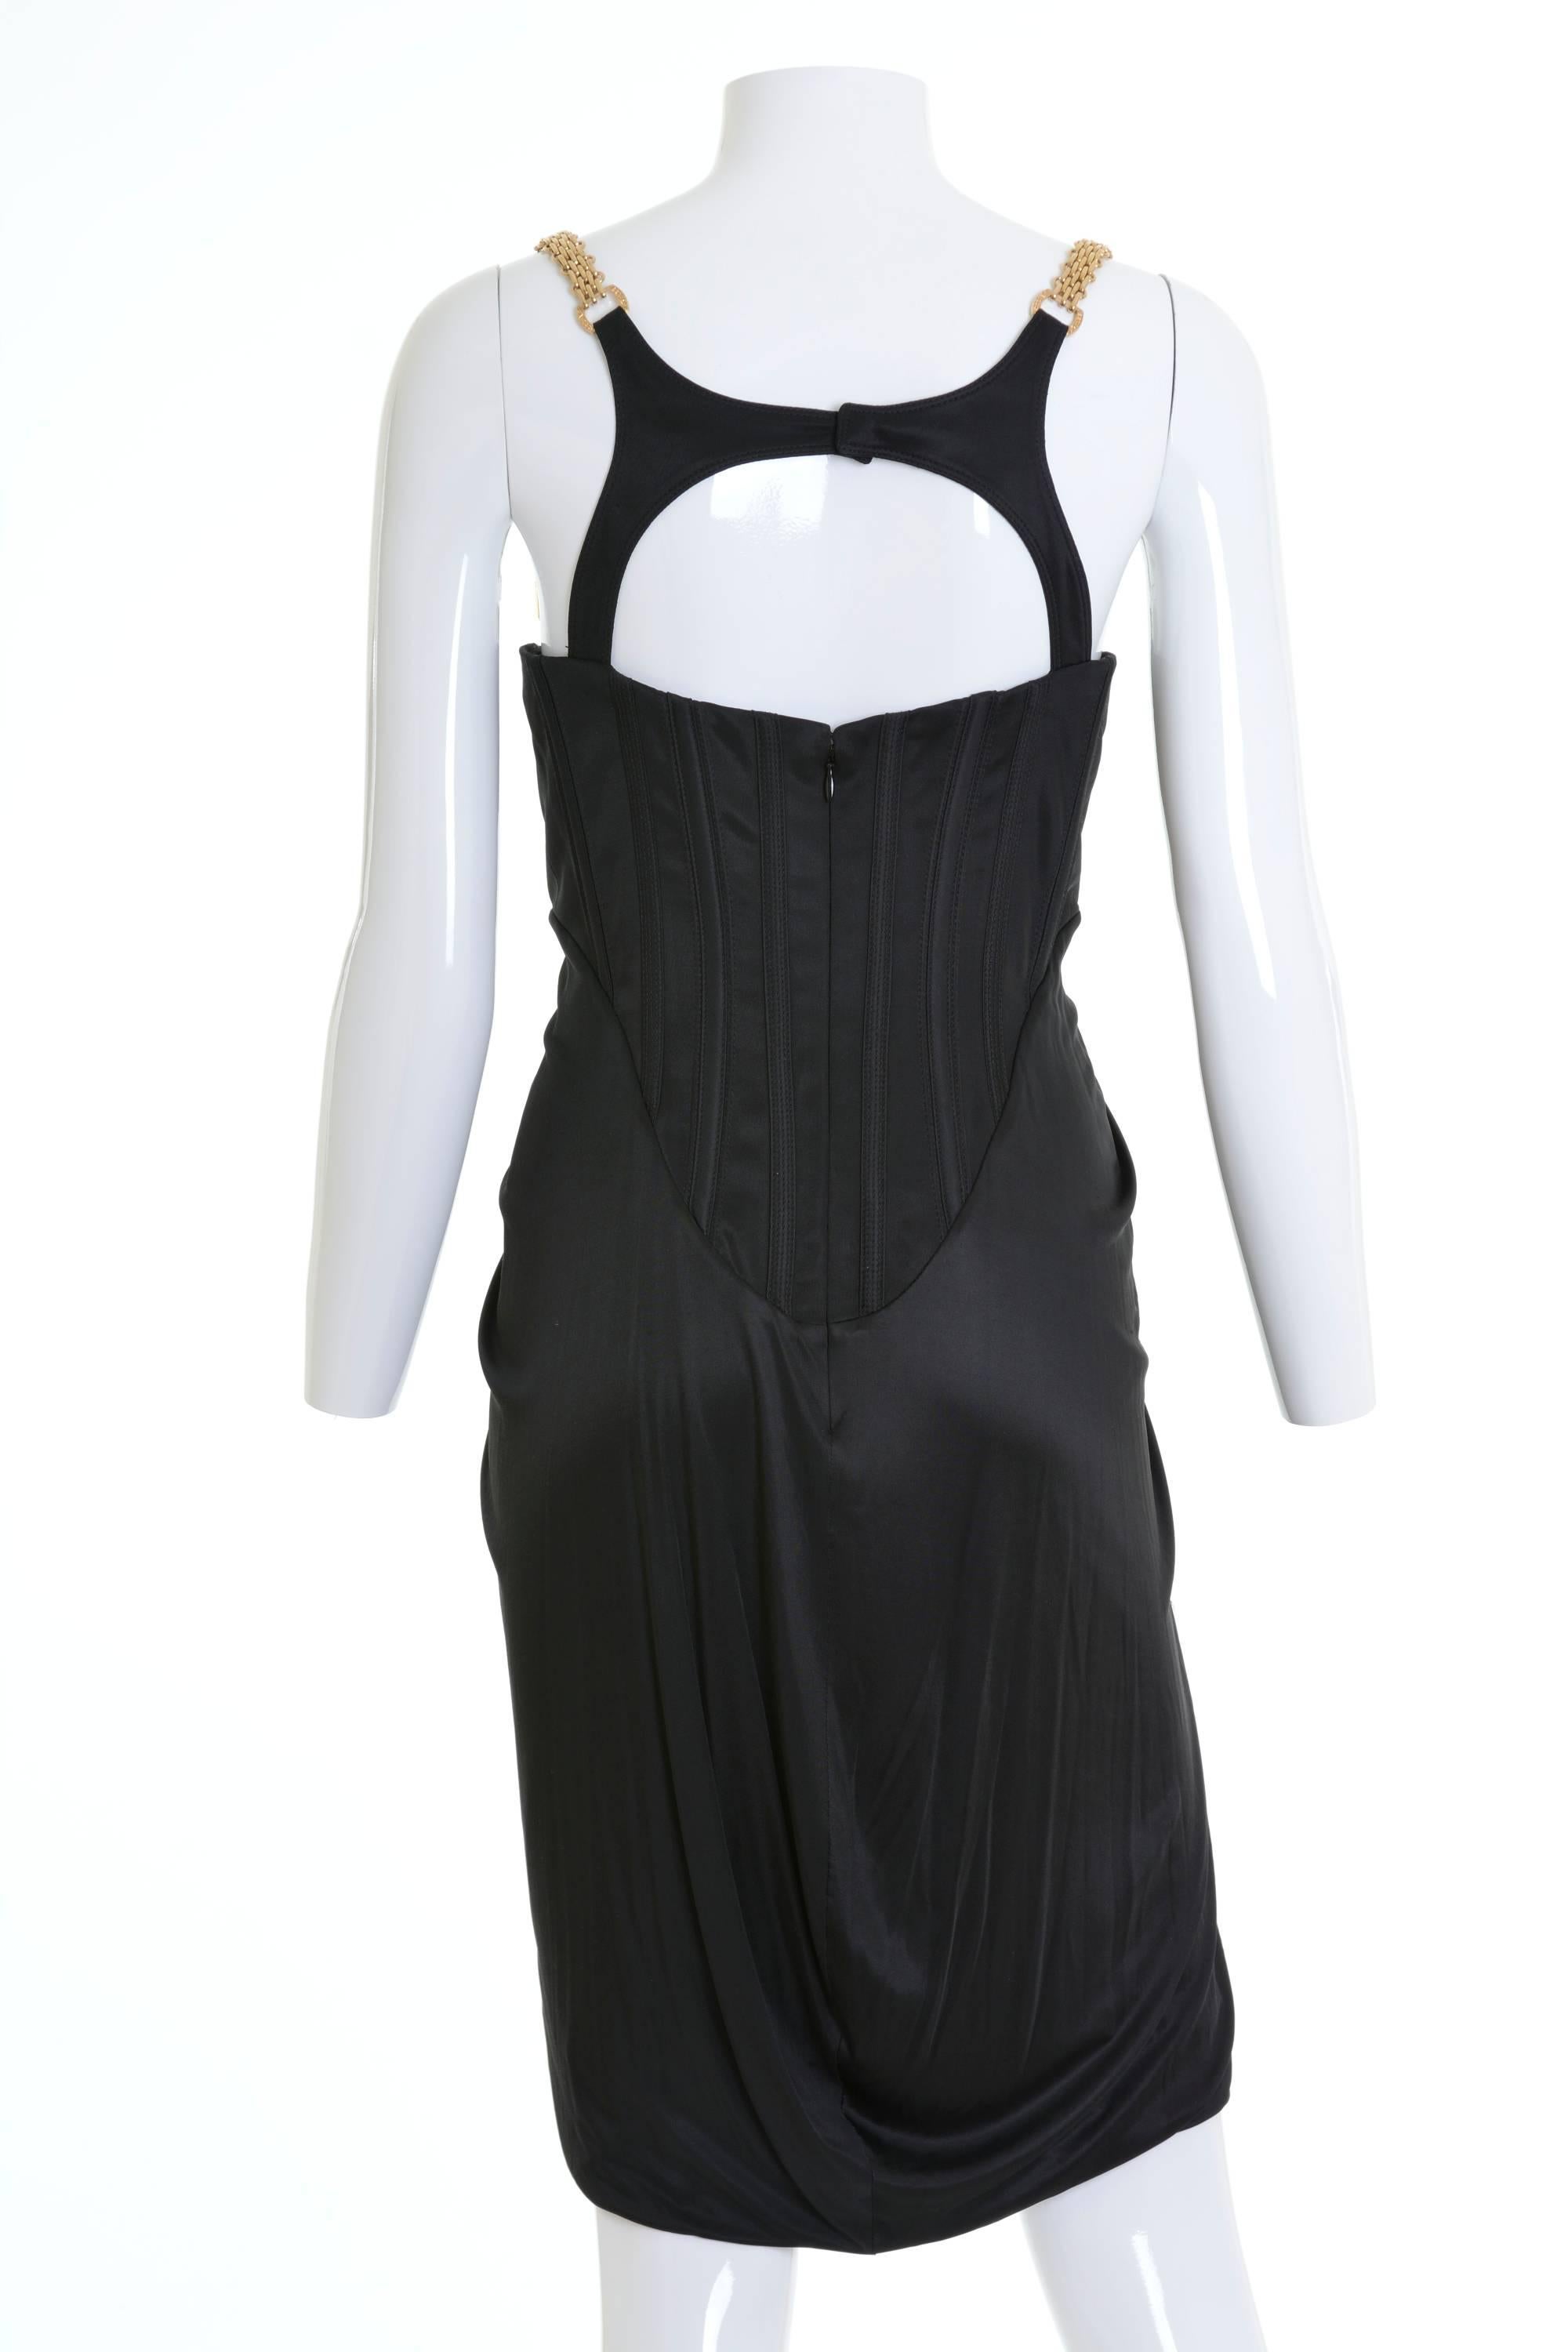 Gianni Versace bustier dress in black rayon fabric with gold cable chain strap and back opening. Empire line, top-stitches, boning bodice, with back zip closure and Versace metail details. 

Good Condition

Label: Gianni Versace 
Fabric: 99% Rayon